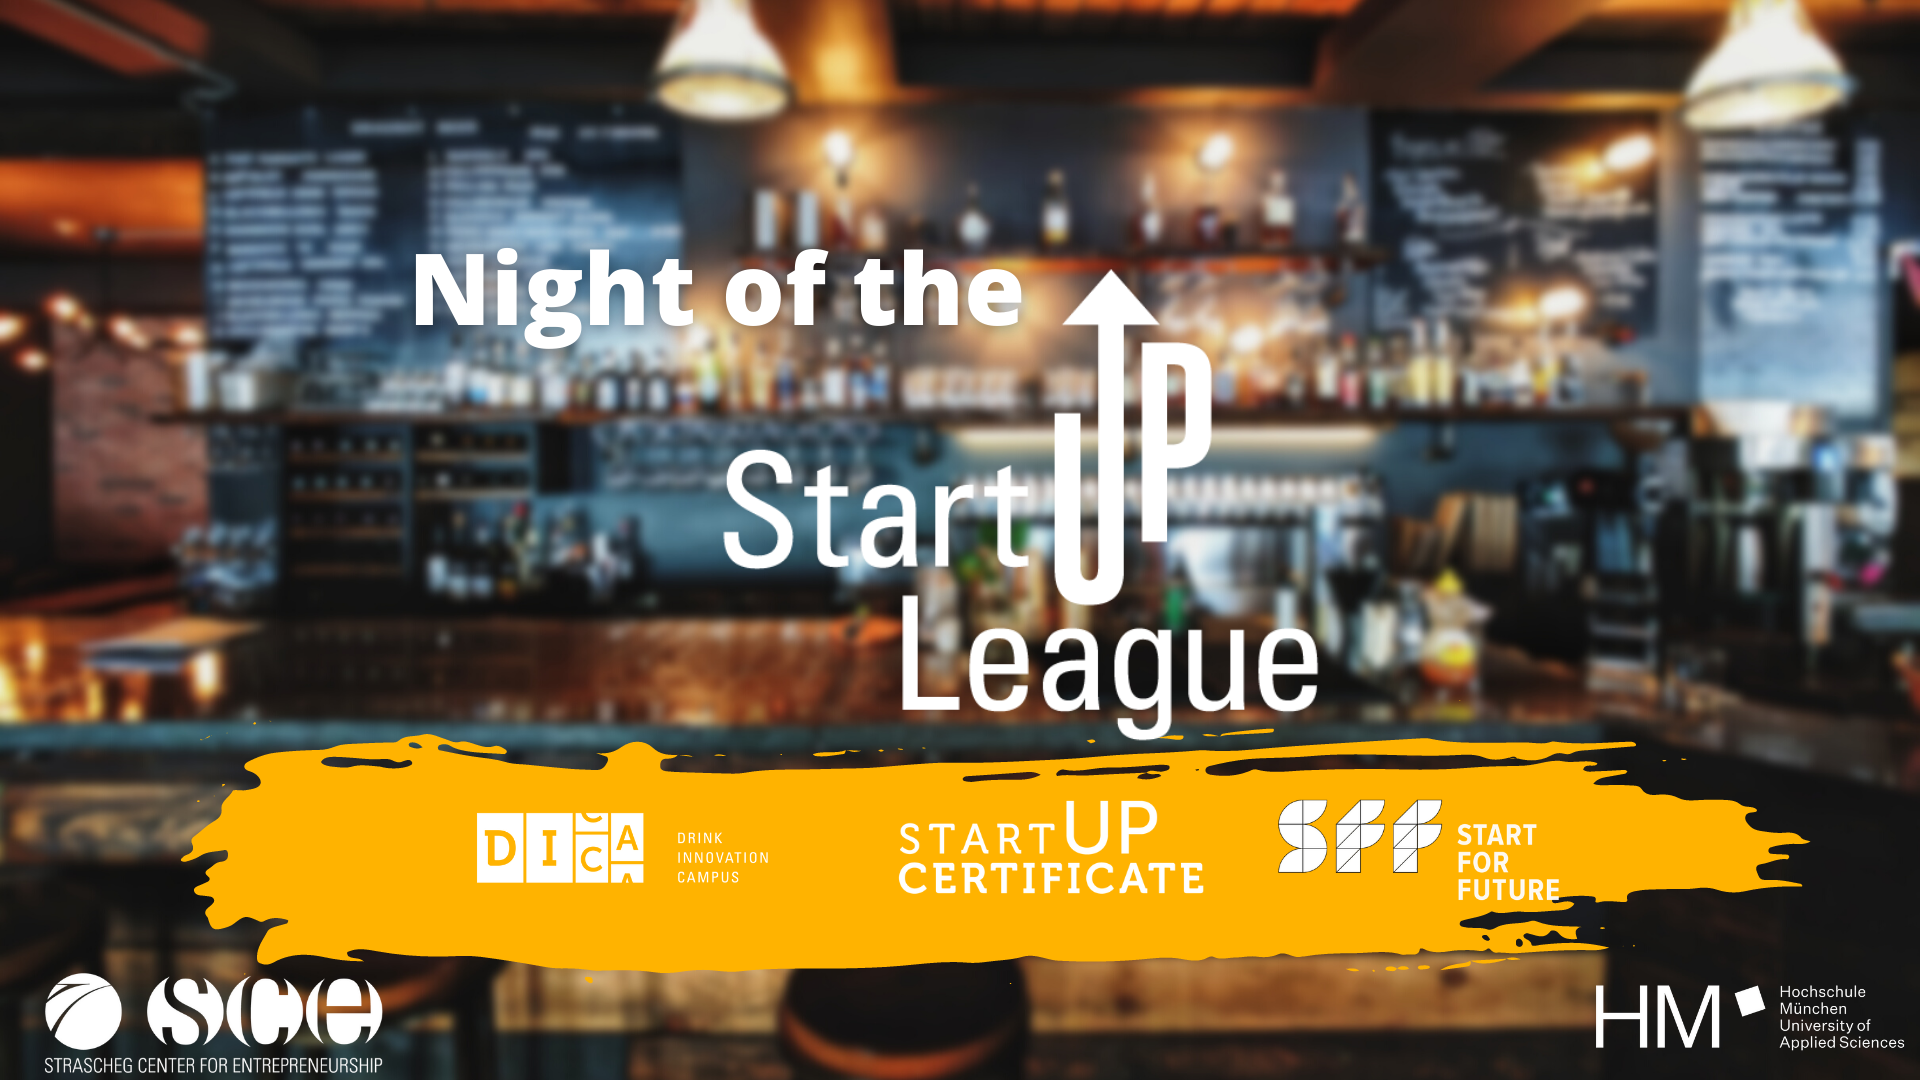 Innovations-Café: Night of the Start-up League